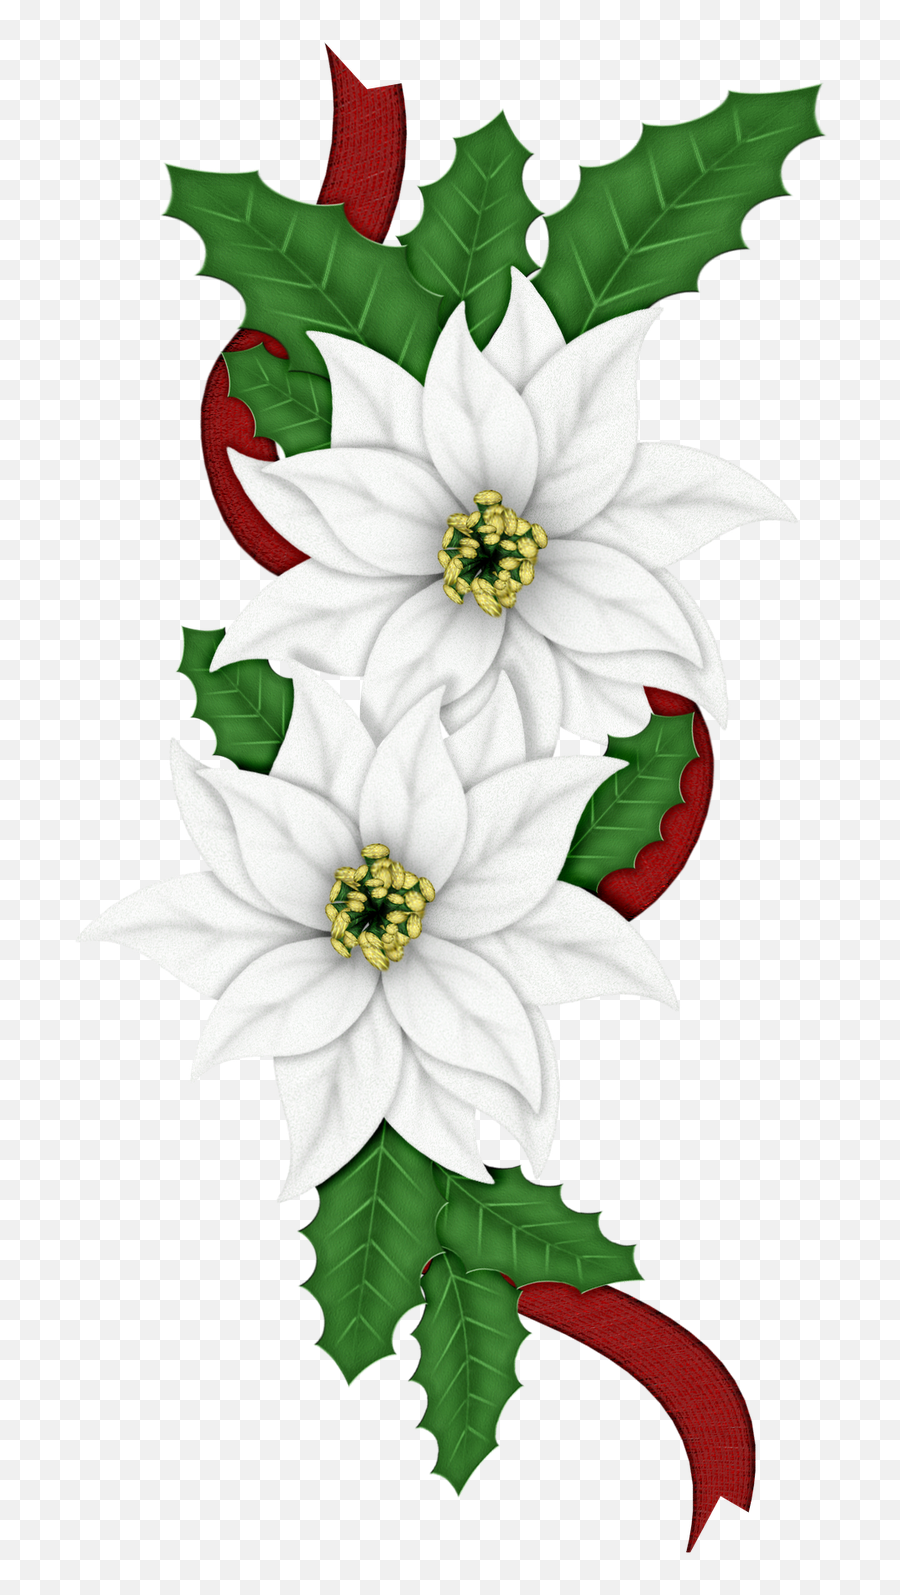 Edelweiss Flower Png Images Free Download - Christmas Edelweiss,Poinsettia Transparent Background